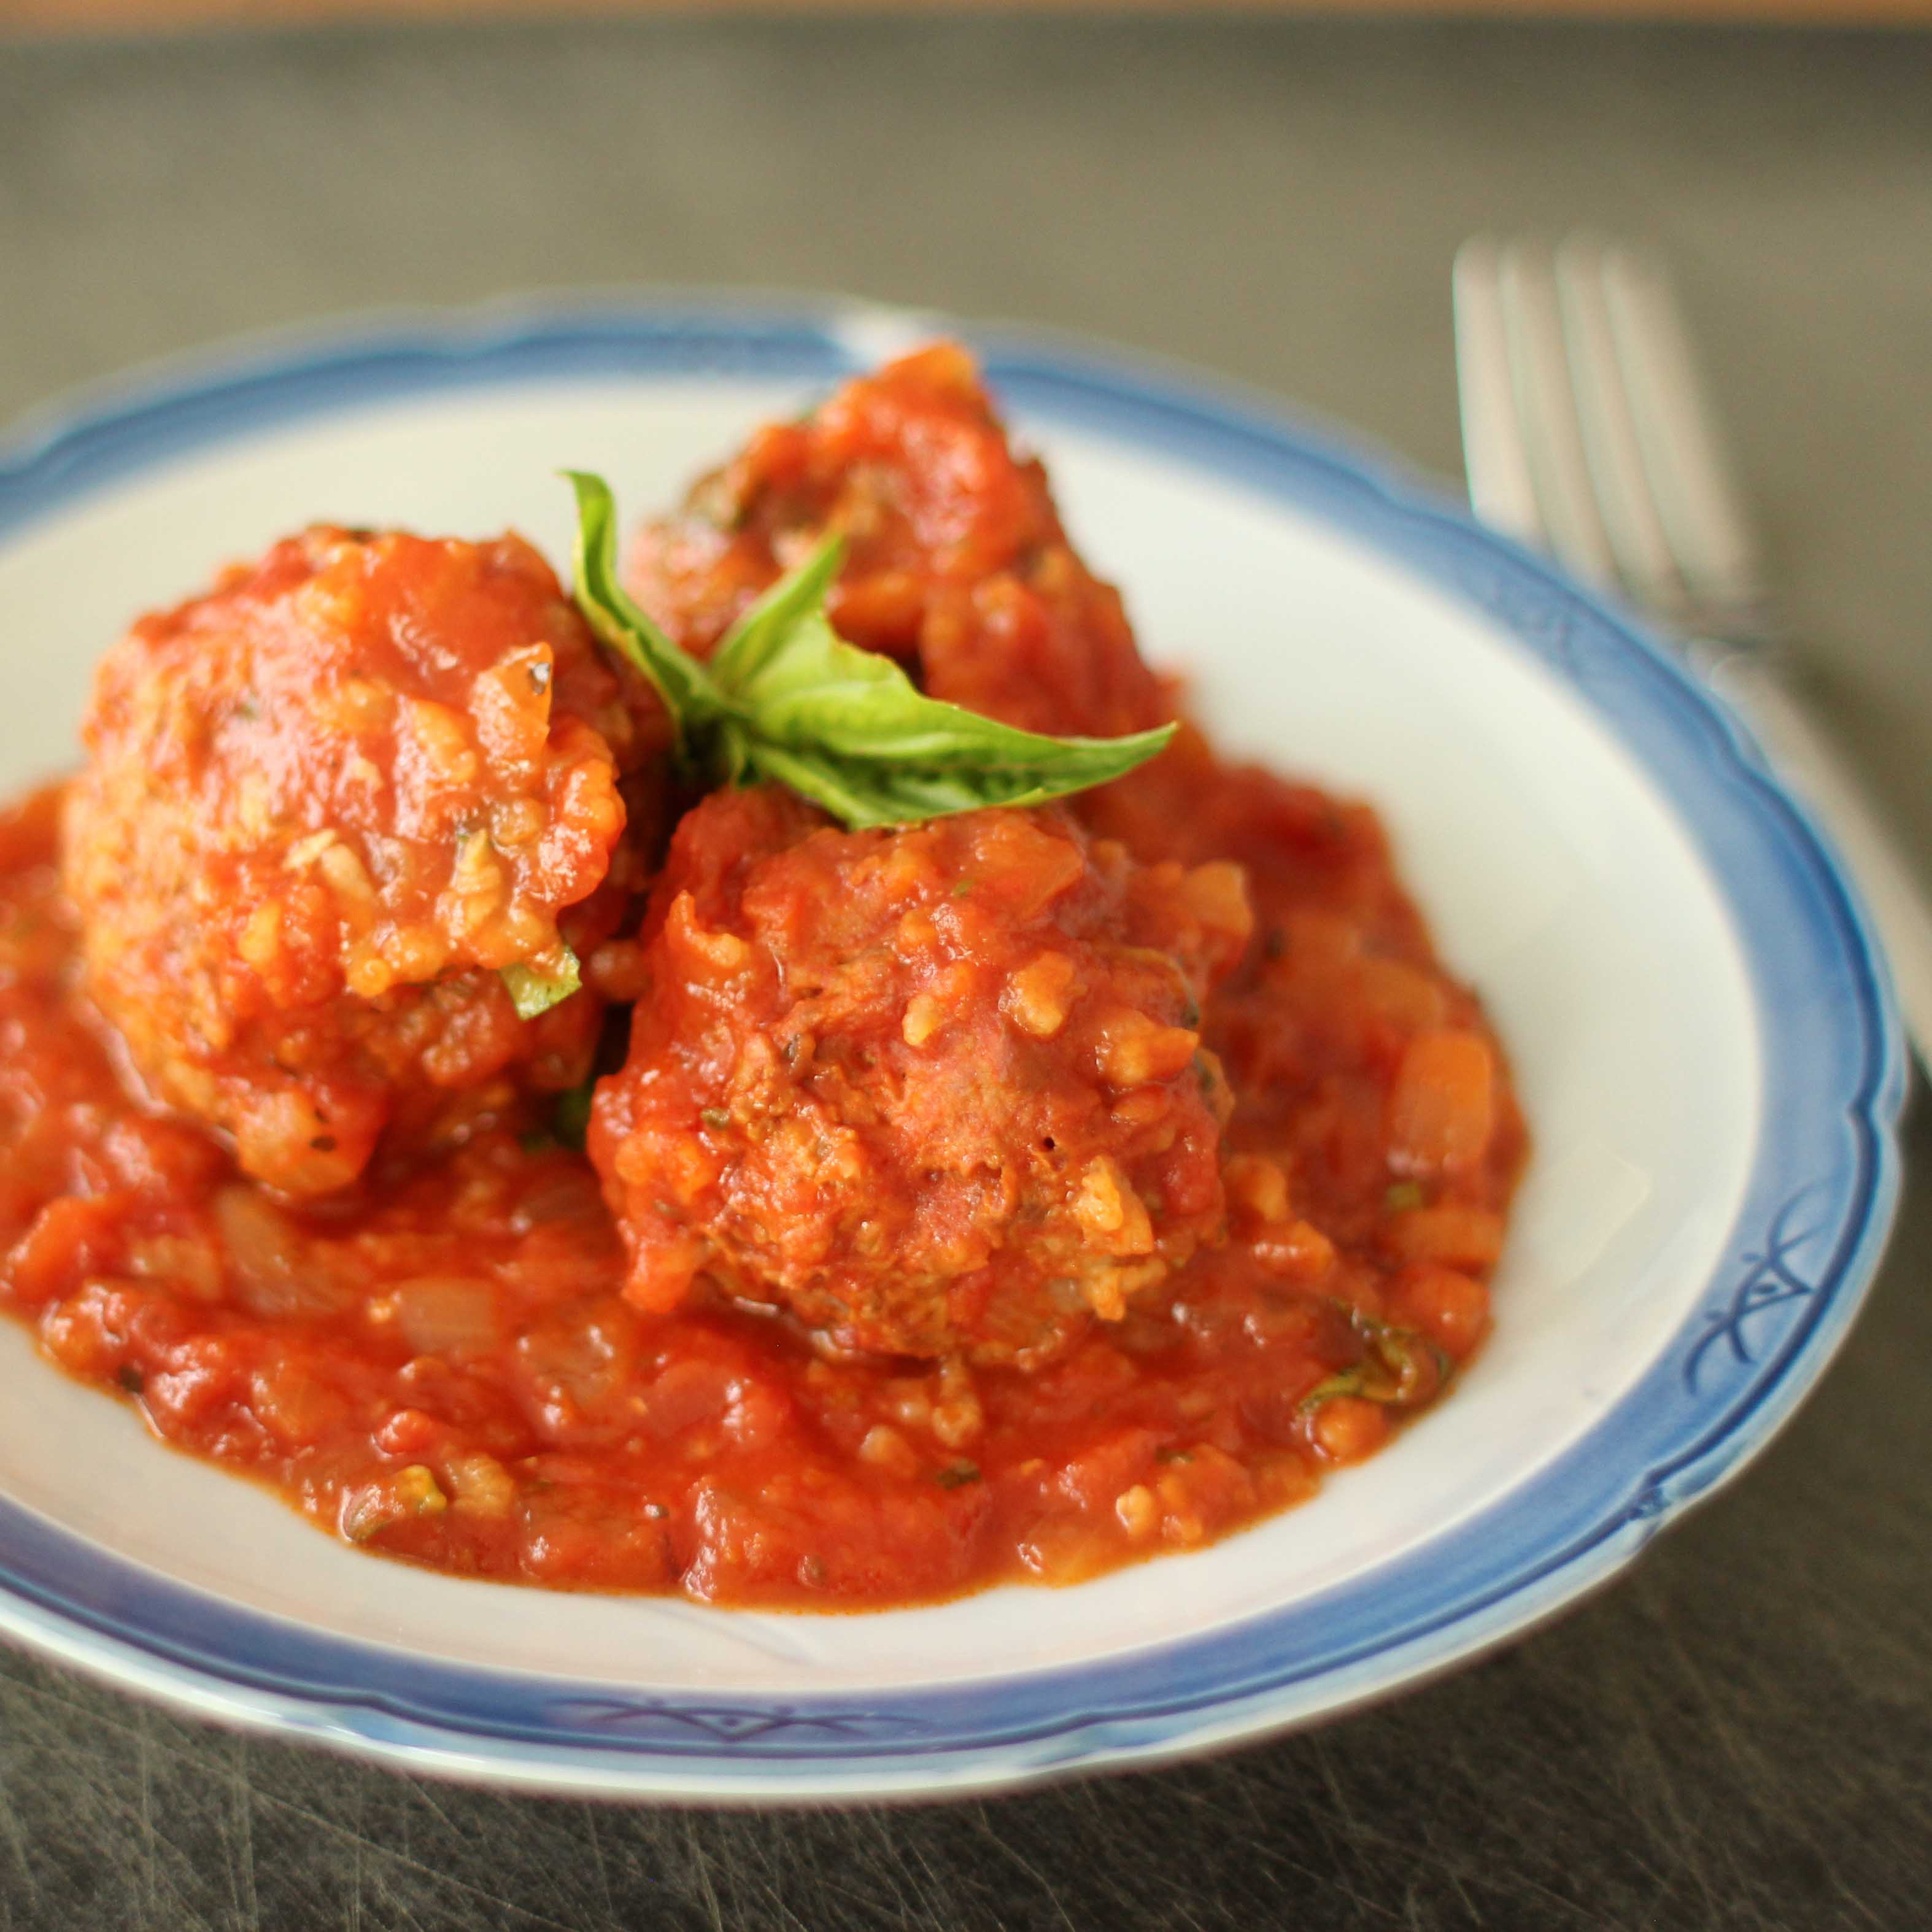 <p>Mixing prune puree into gluten-free meatballs helps bind the mixture together while improving flavor.</p>
